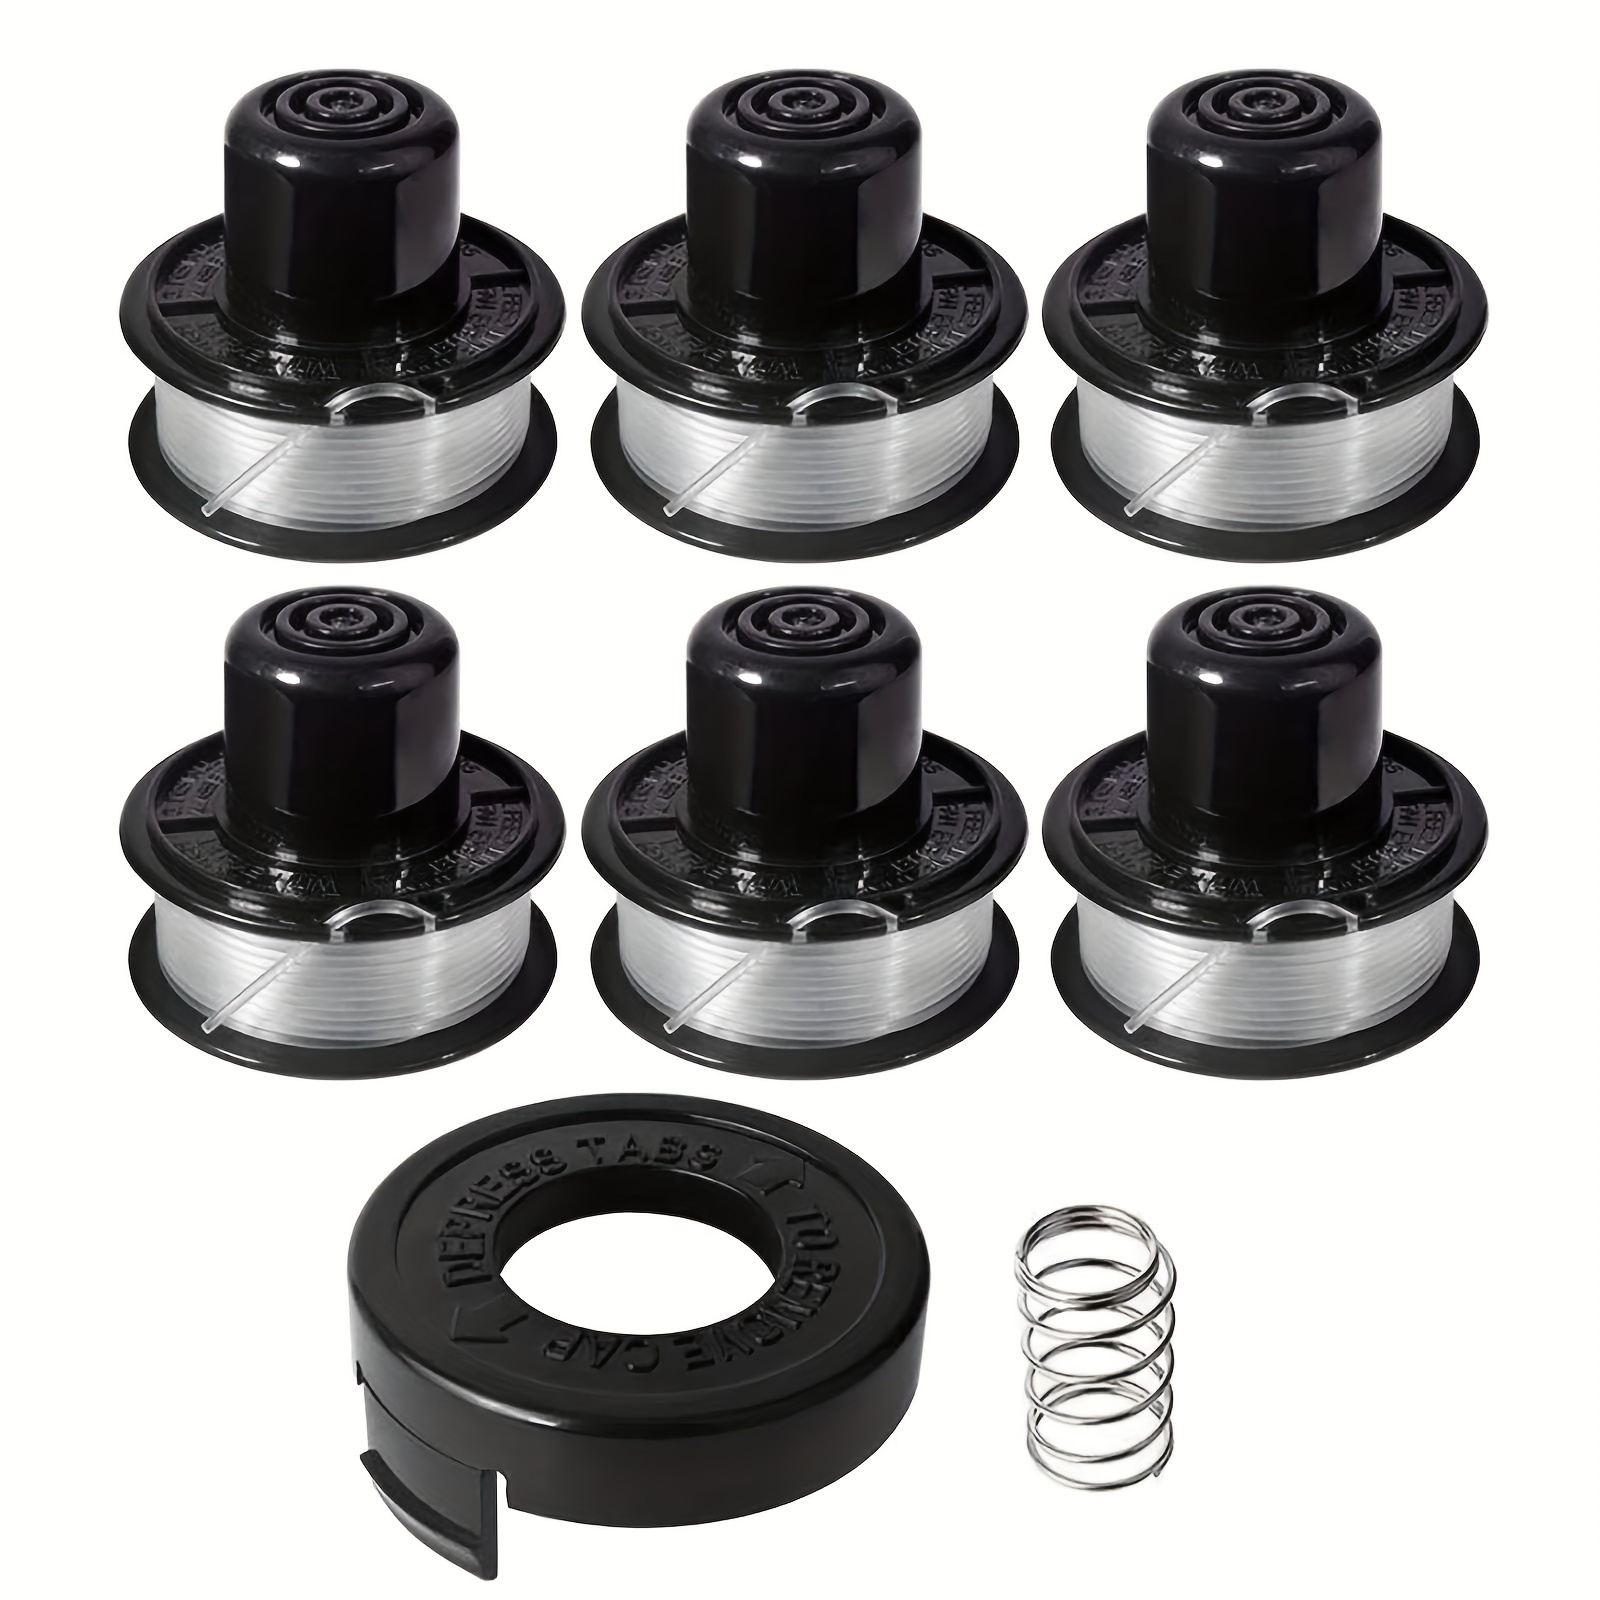  Trimmer Spools for Black and Decker RS-136 Weed Eater